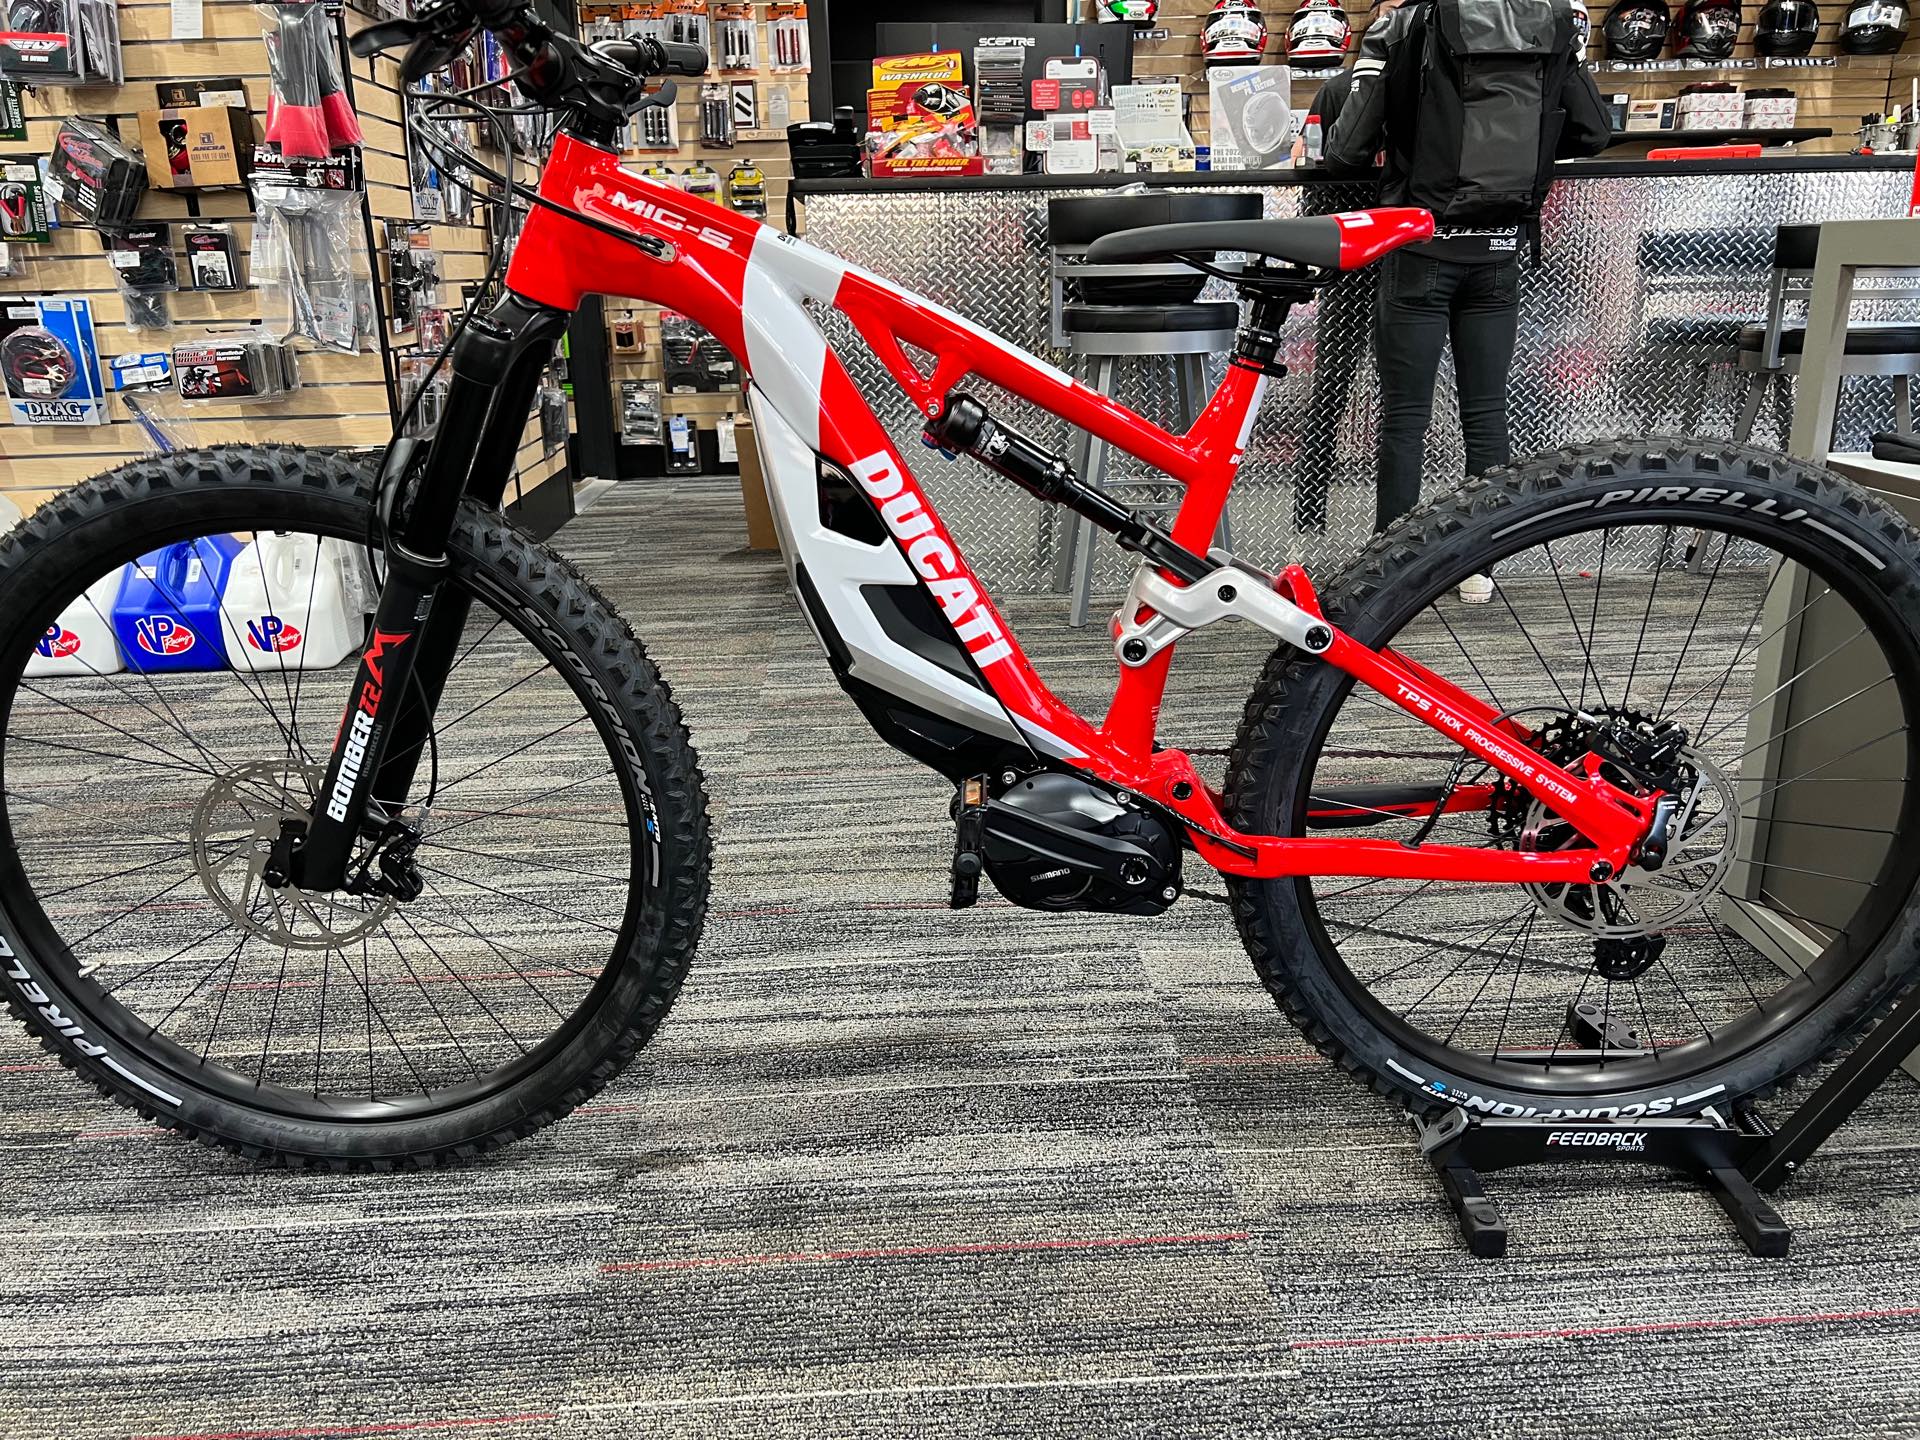 2021 DUCATI MIG S 630 (L) at Aces Motorcycles - Fort Collins